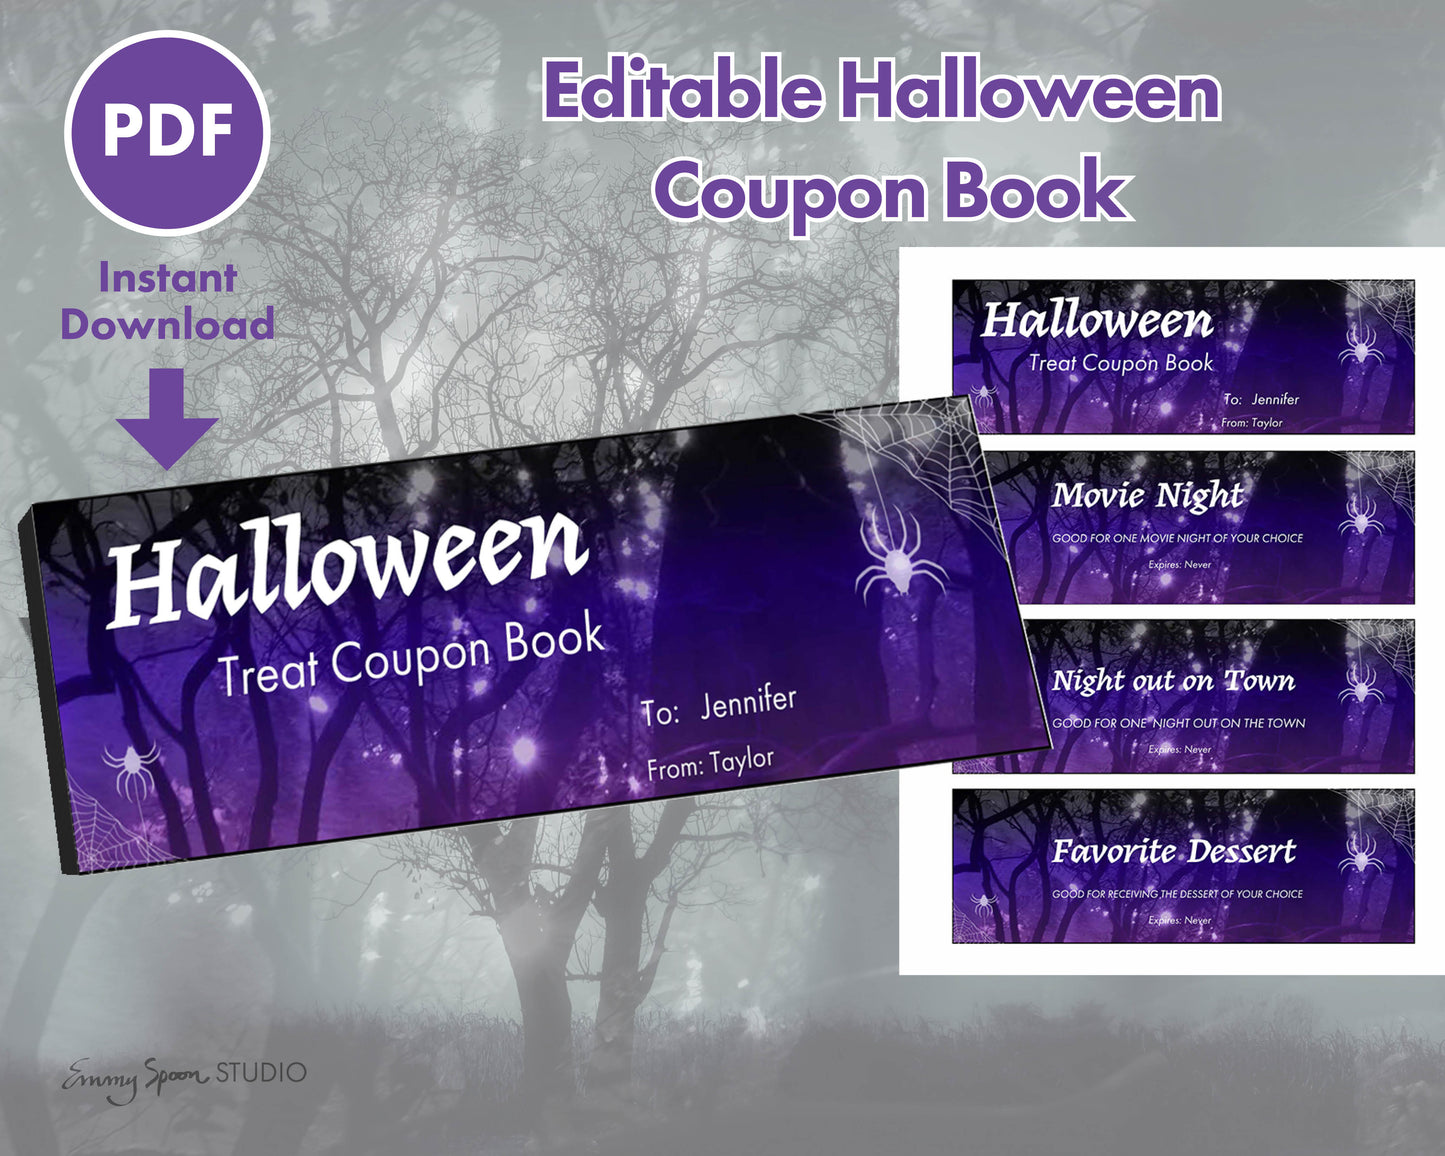 PDF Instant Download Editable Halloween Coupon Book